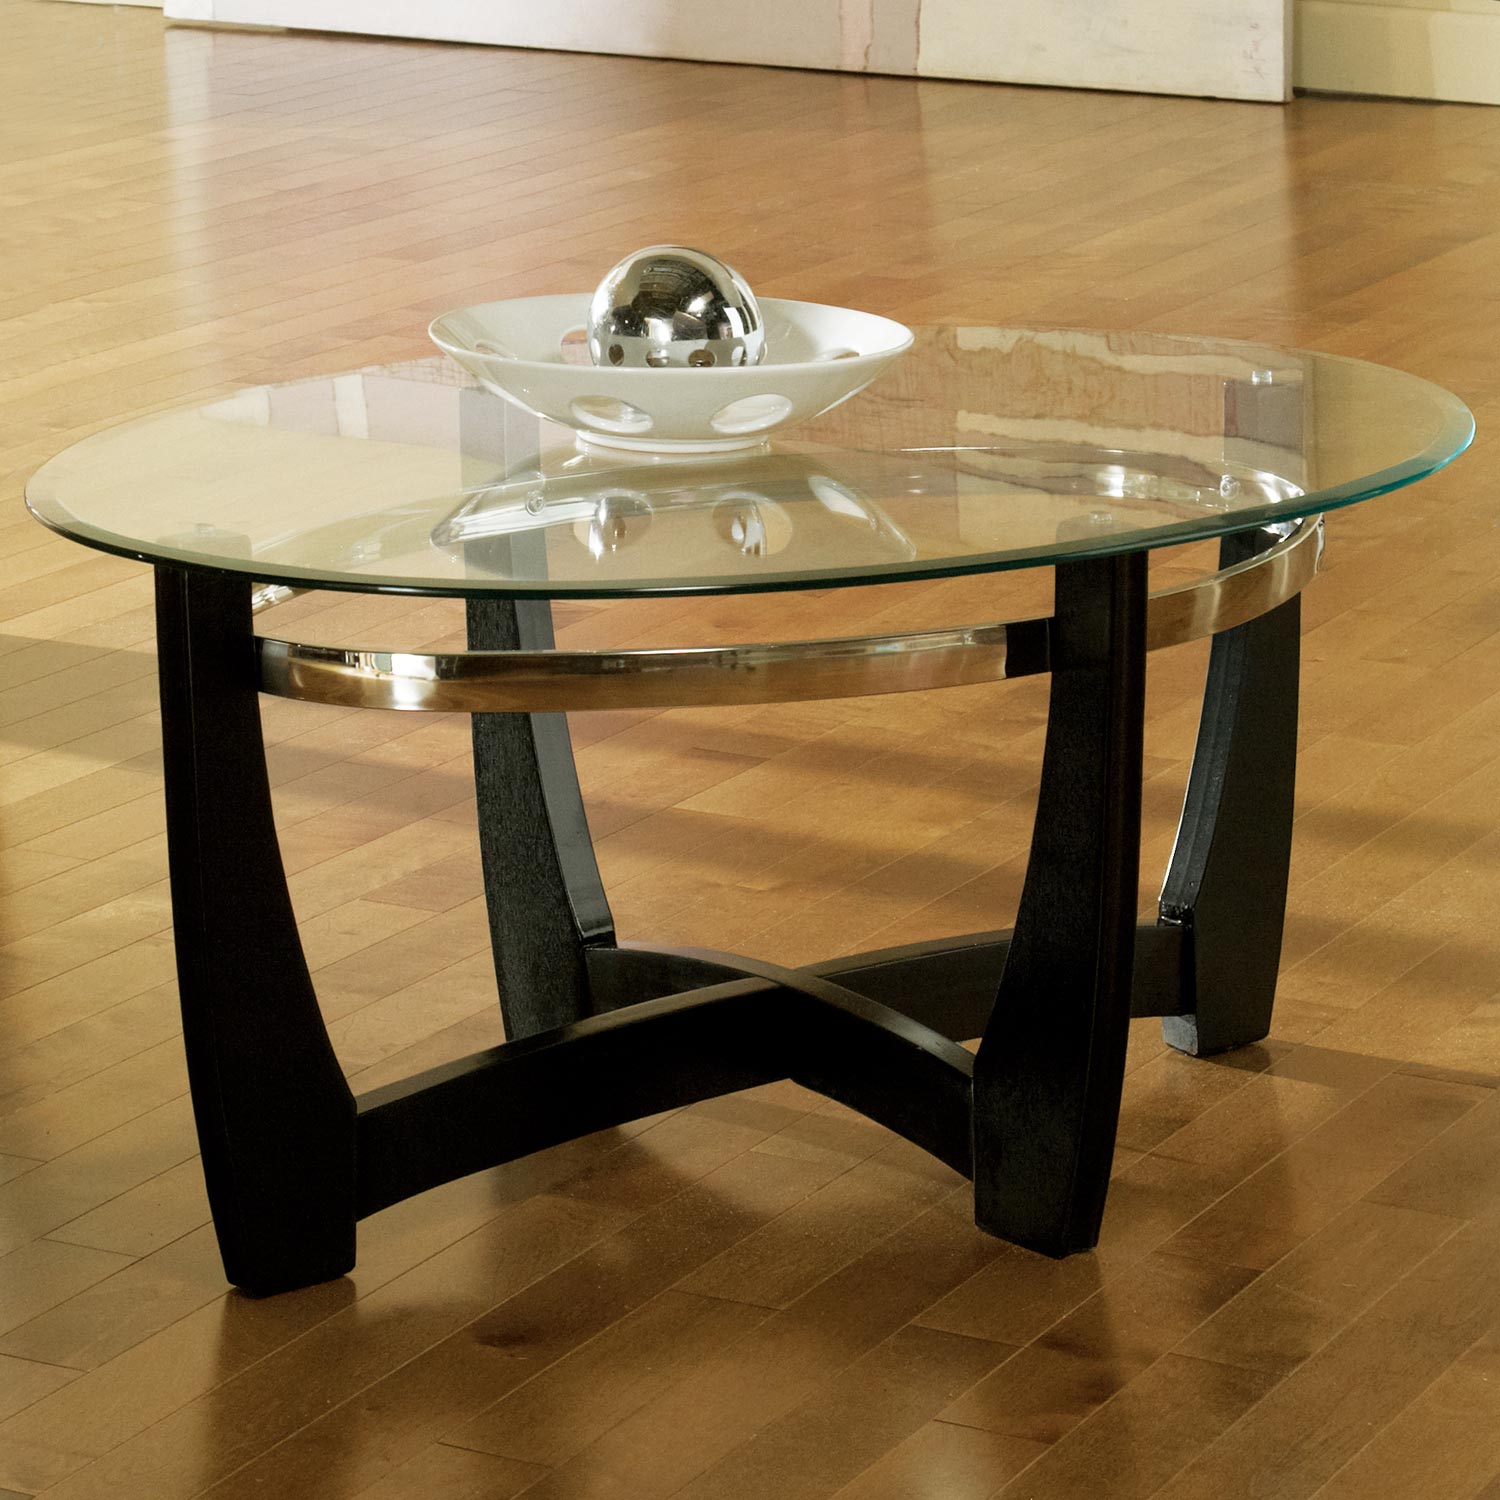 Matinee Modern Occasional Tables Set - Clear Glass, Black Base | DCG Stores